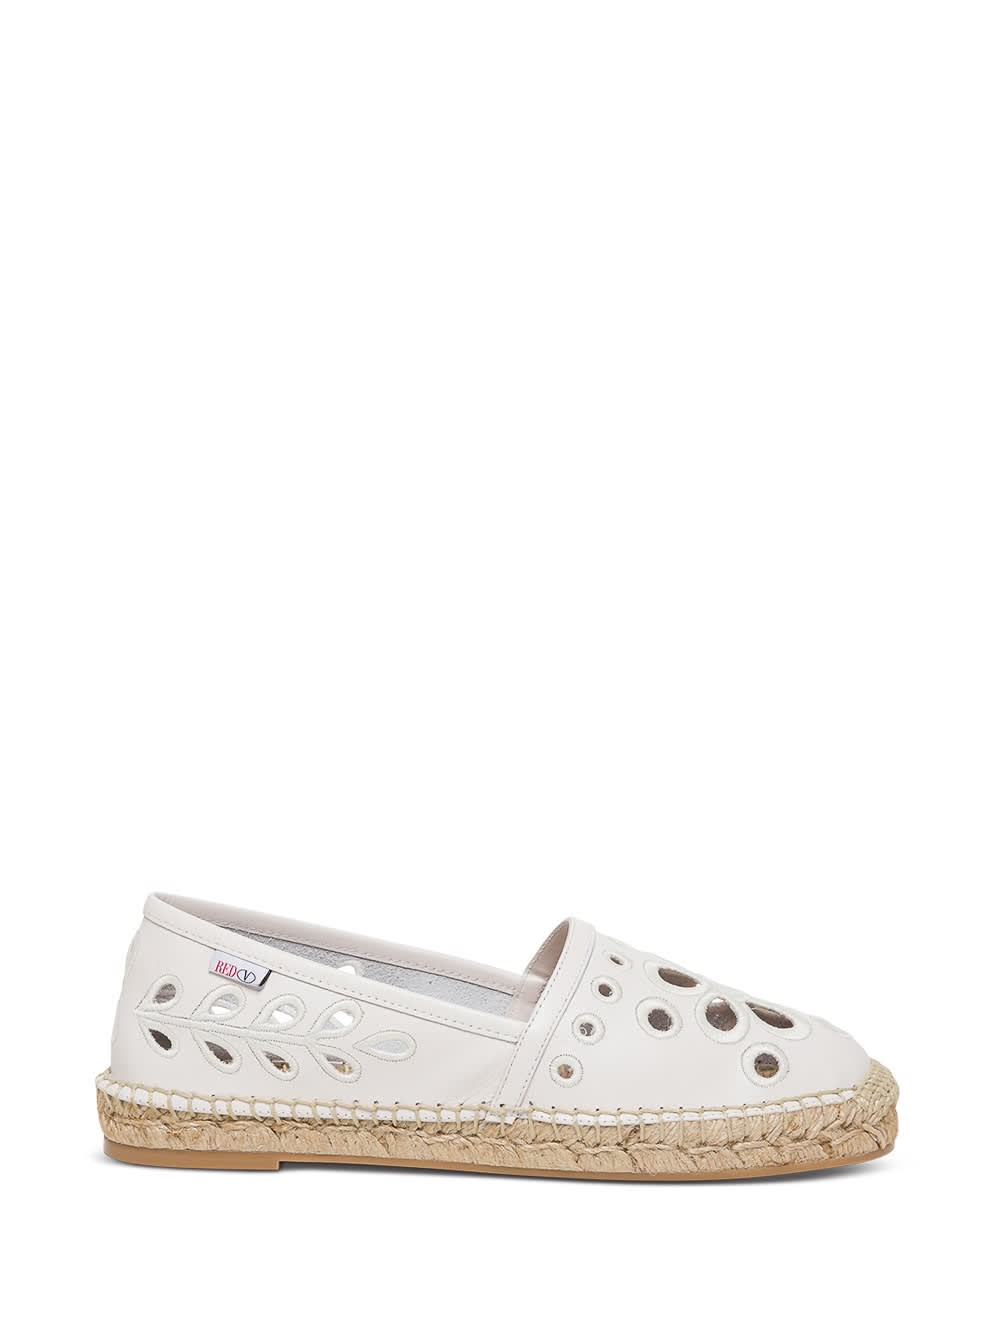 RED Valentino Perforated Espadrilles In White Leather